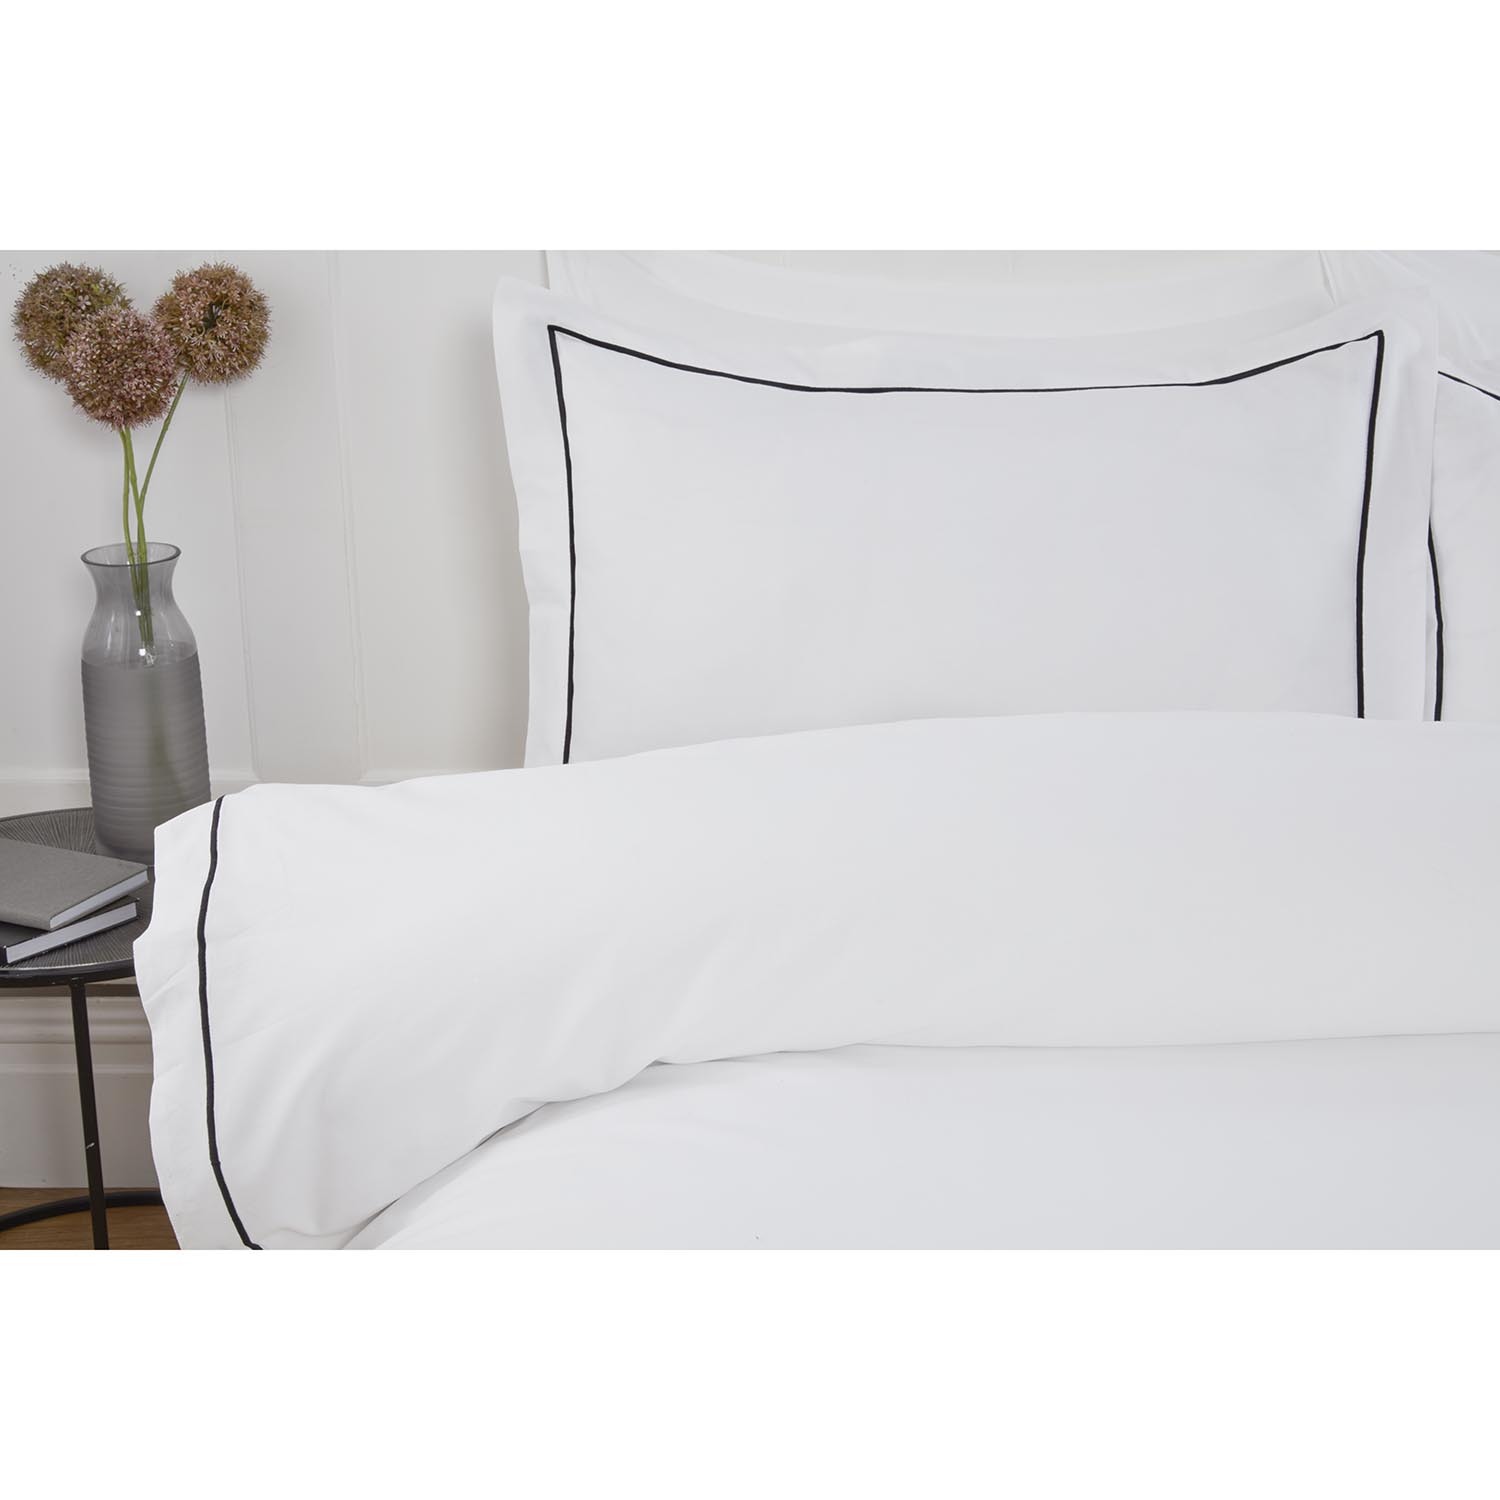 Oxford Bamboo Duvet Cover and Pillowcase Set - White / King Image 2